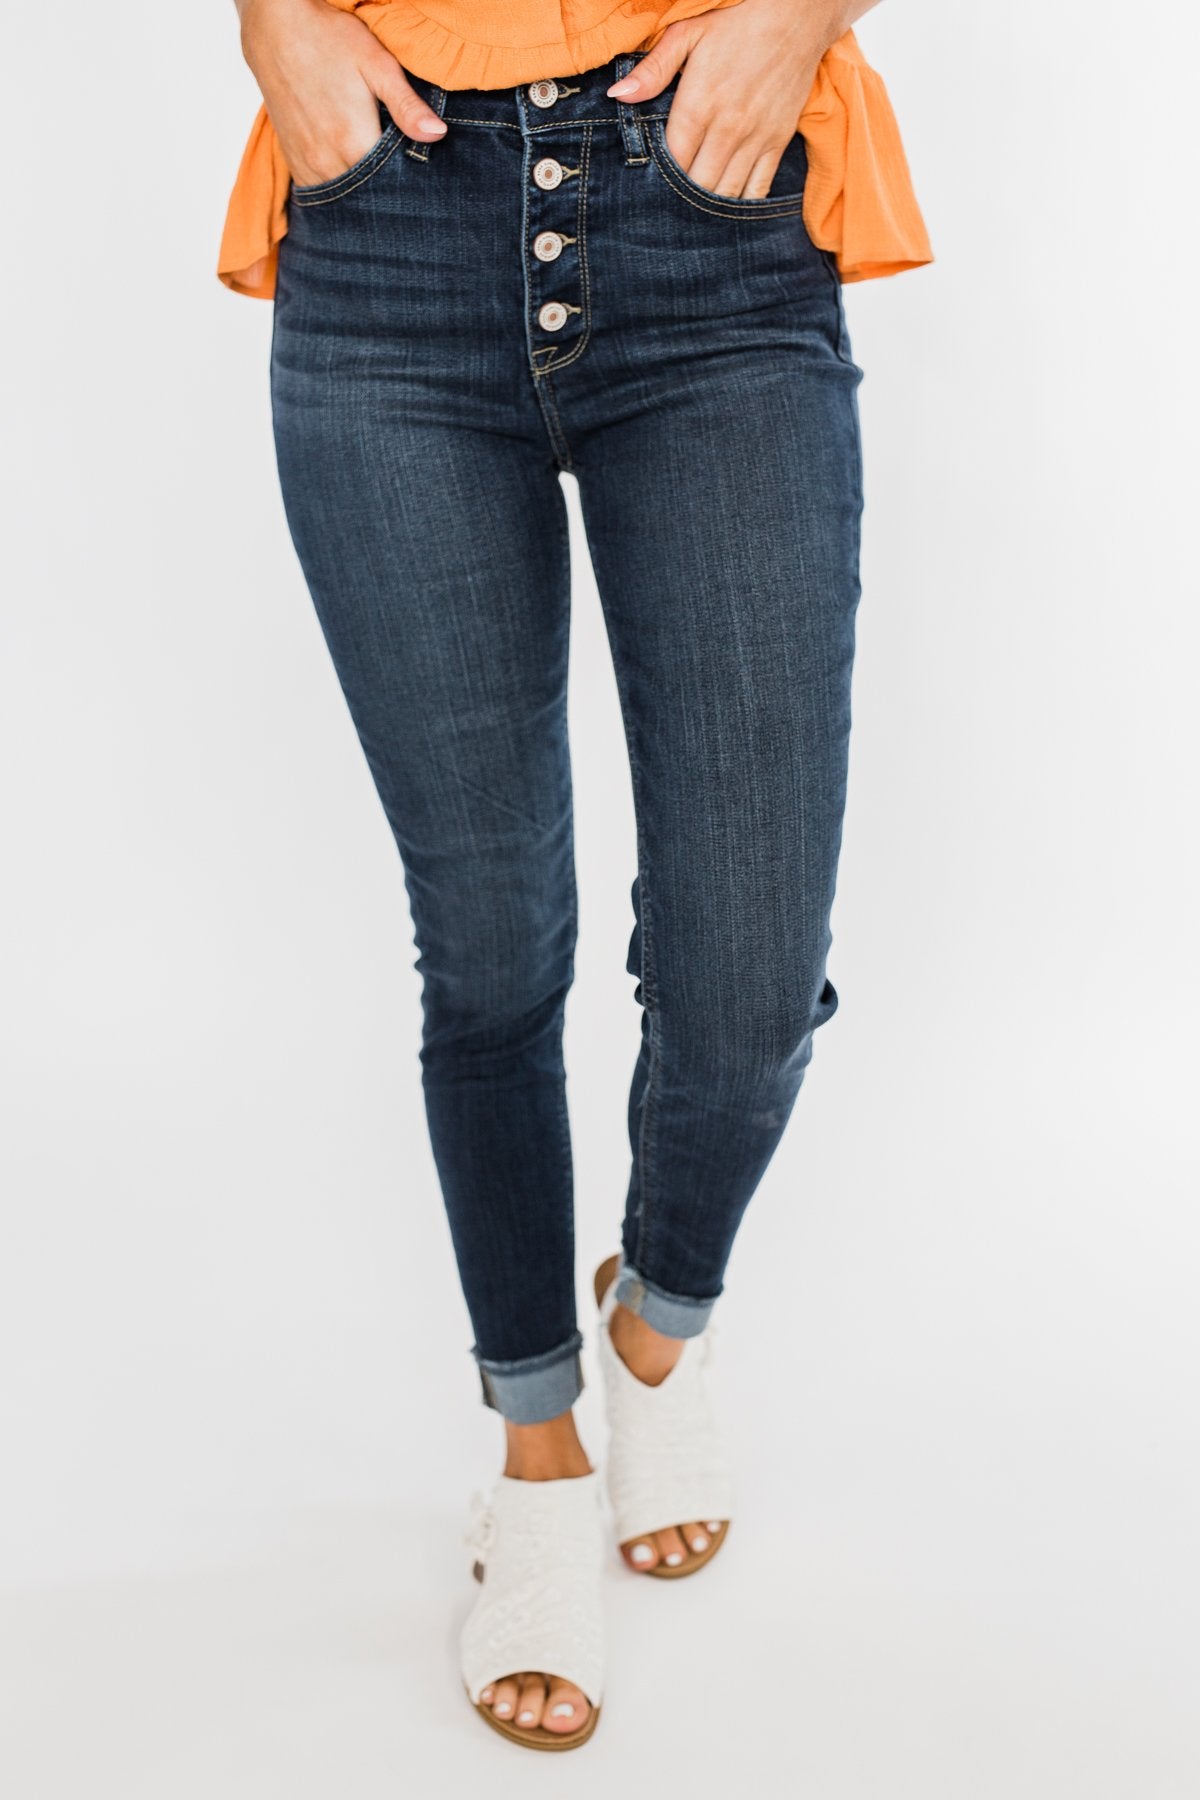 KanCan Button Fly Jeans- Denise Wash